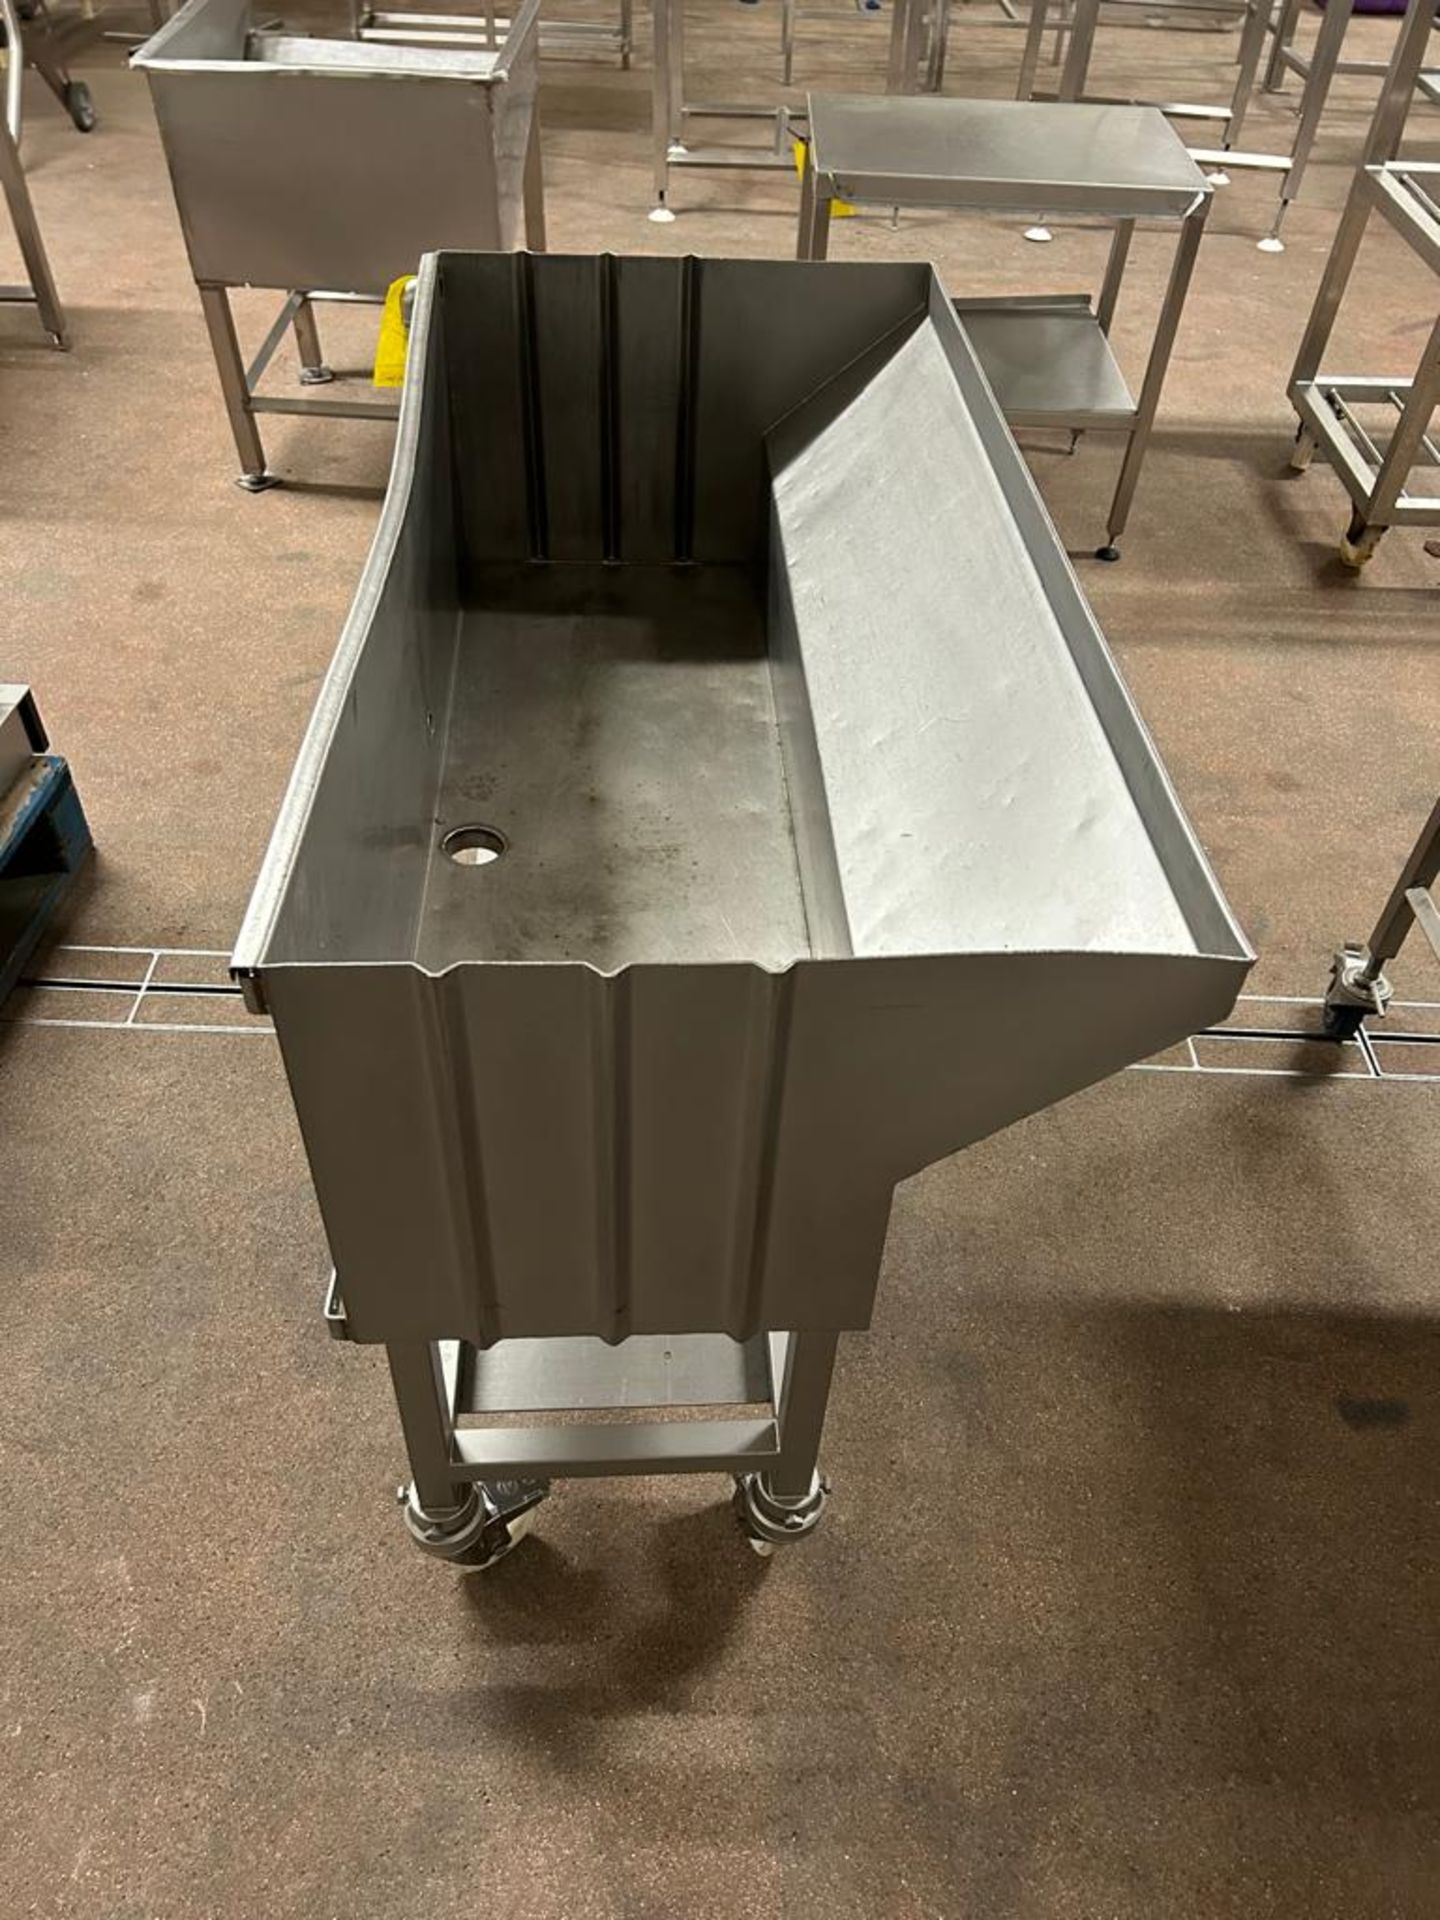 MOBILE TROUGH/SINK - Image 2 of 2